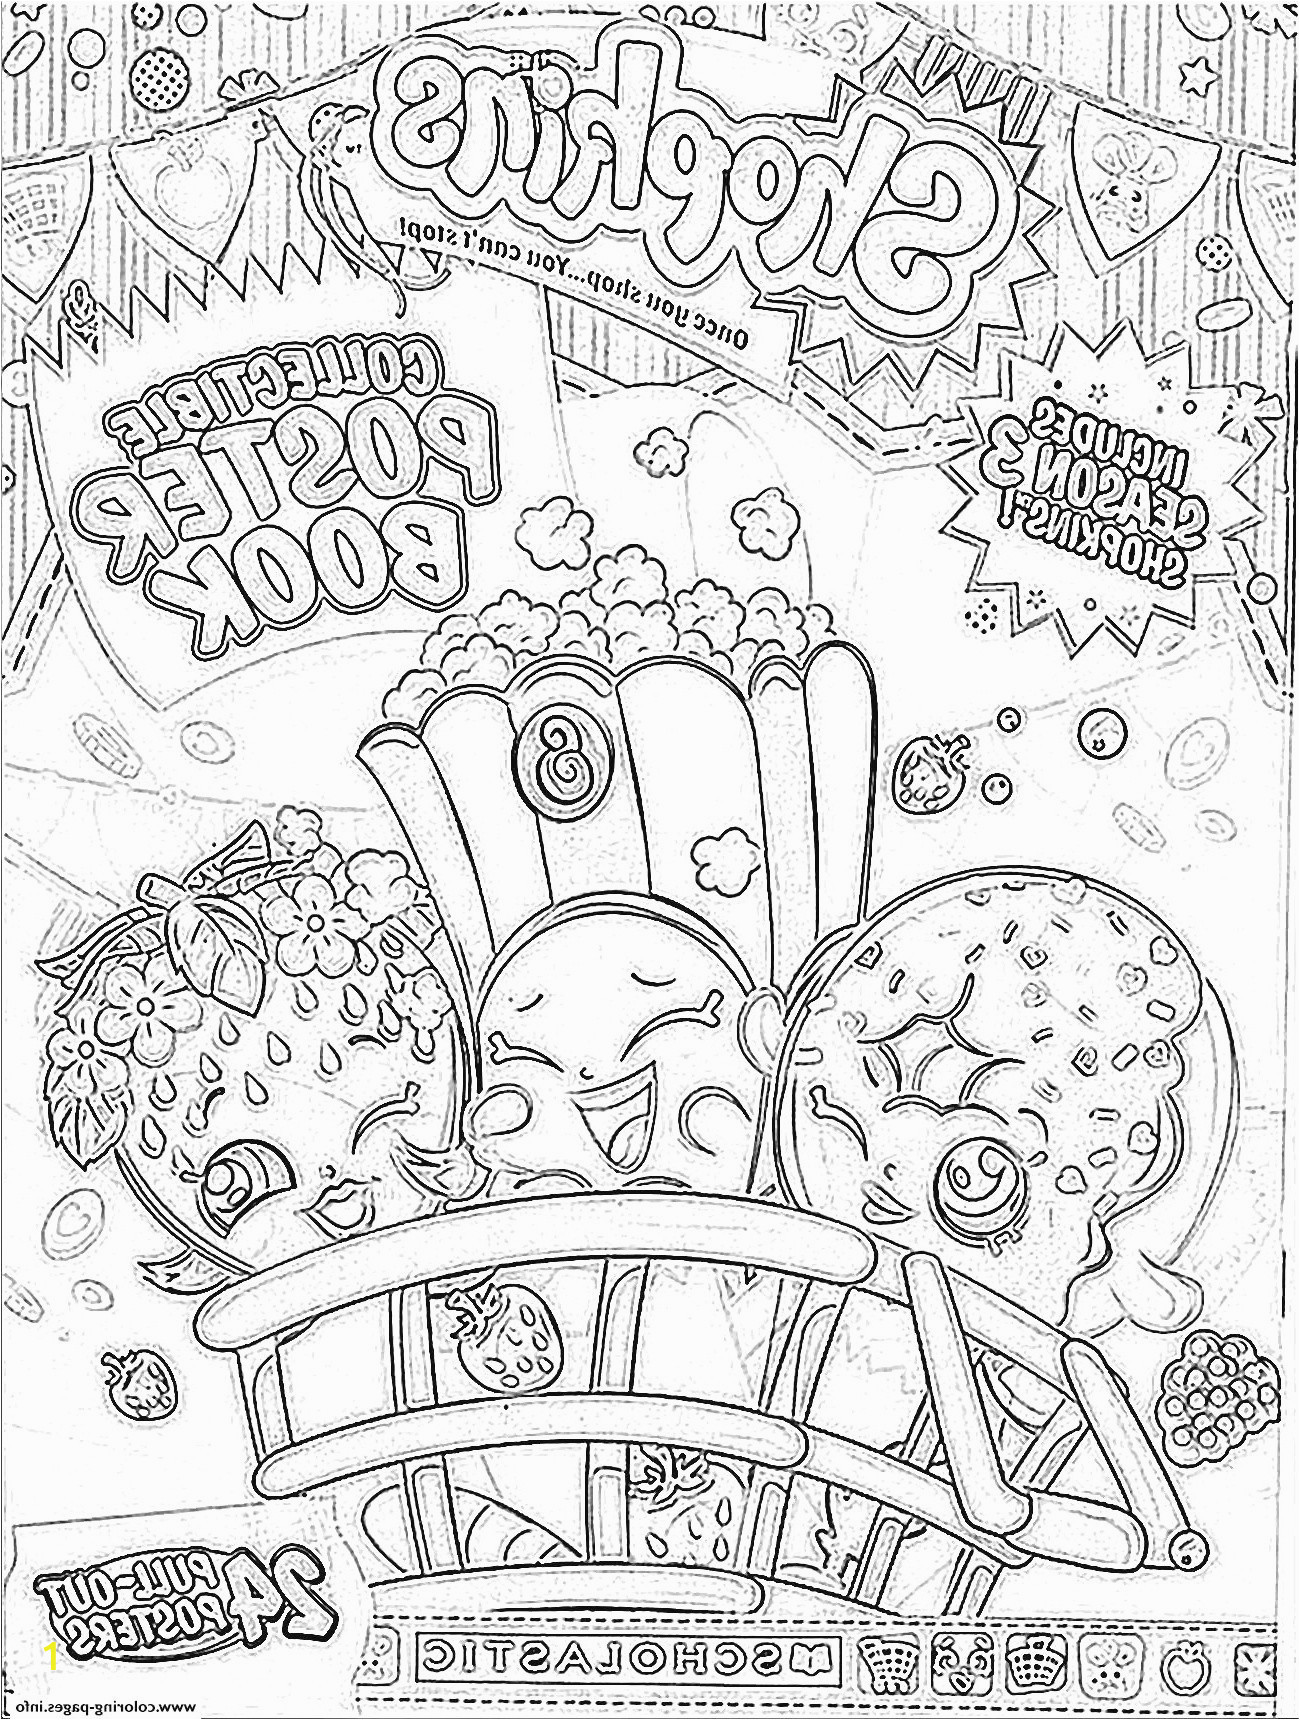 Download Share the Love Coloring Pages